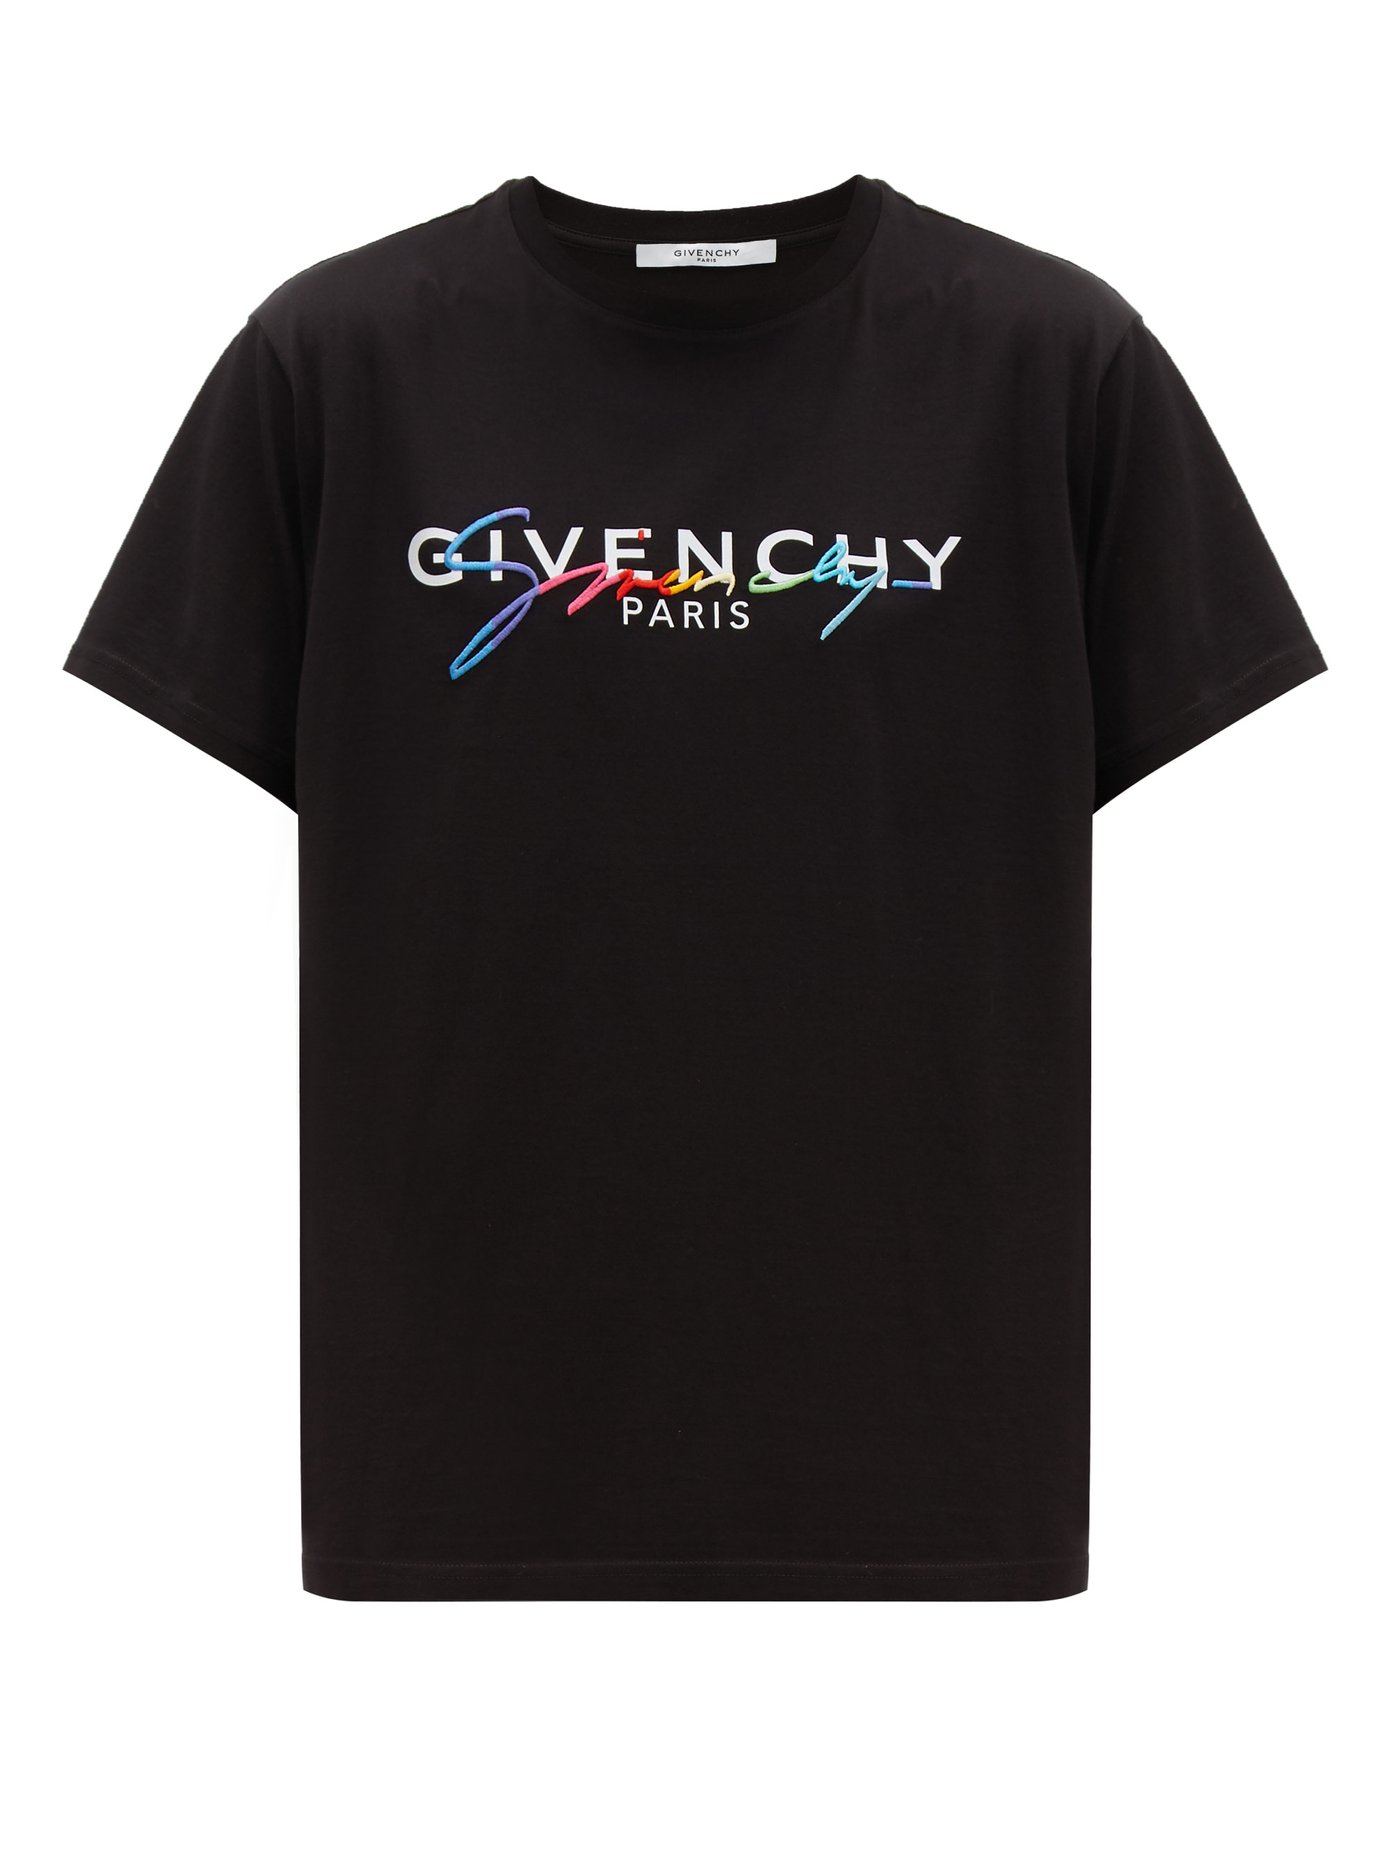 Total 31+ imagen rainbow givenchy